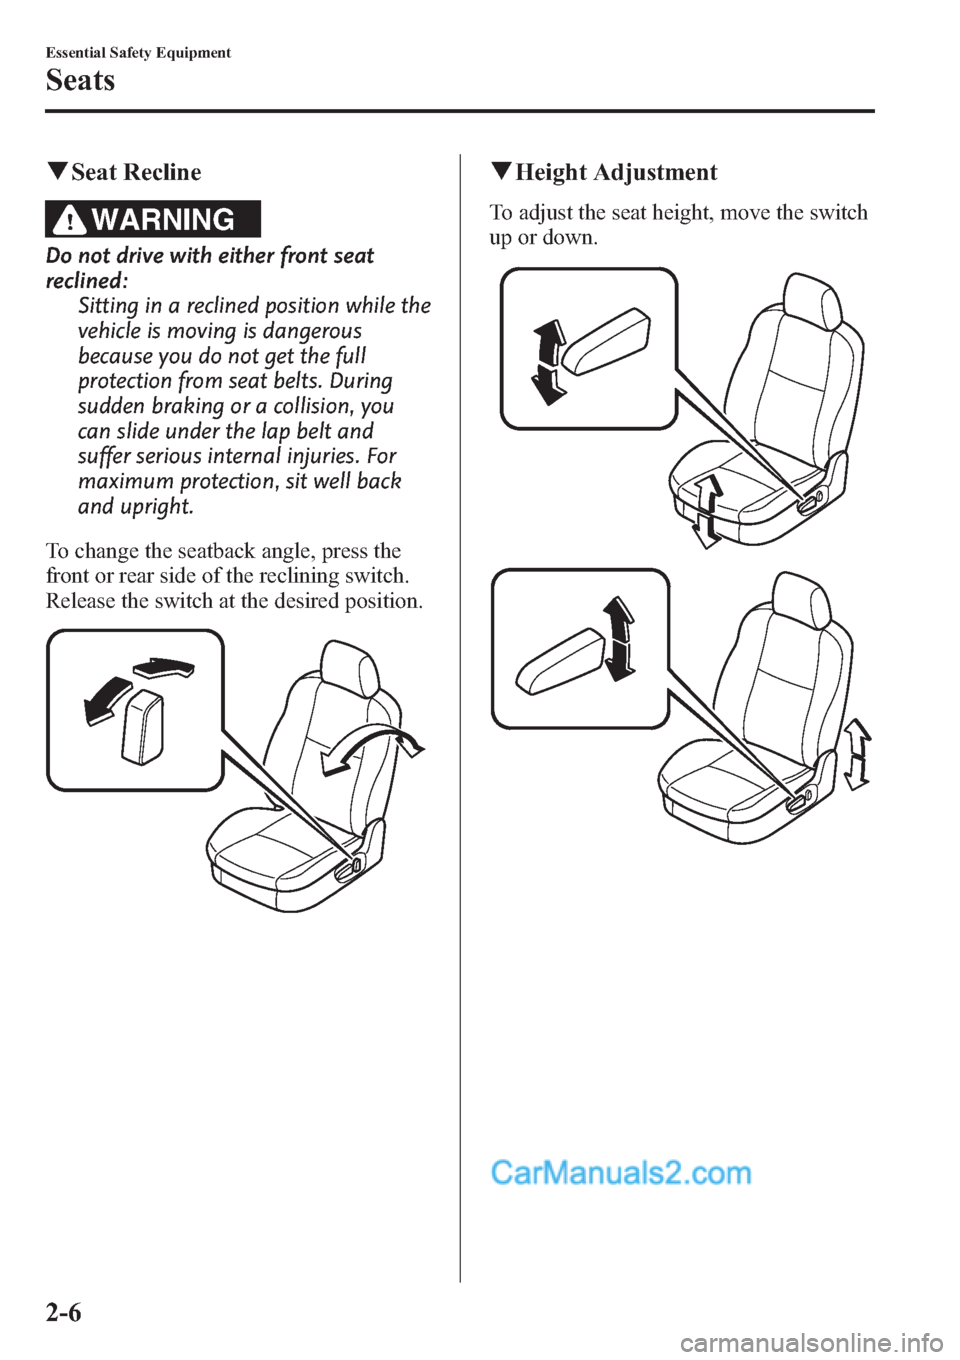 MAZDA MODEL MAZDASPEED 3 2013  Owners Manual (in English) qSeat Recline
WARNING
Do not drive with either front seat
reclined:
Sitting in a reclined position while the
vehicle is moving is dangerous
because you do not get the full
protection from seat belts. 